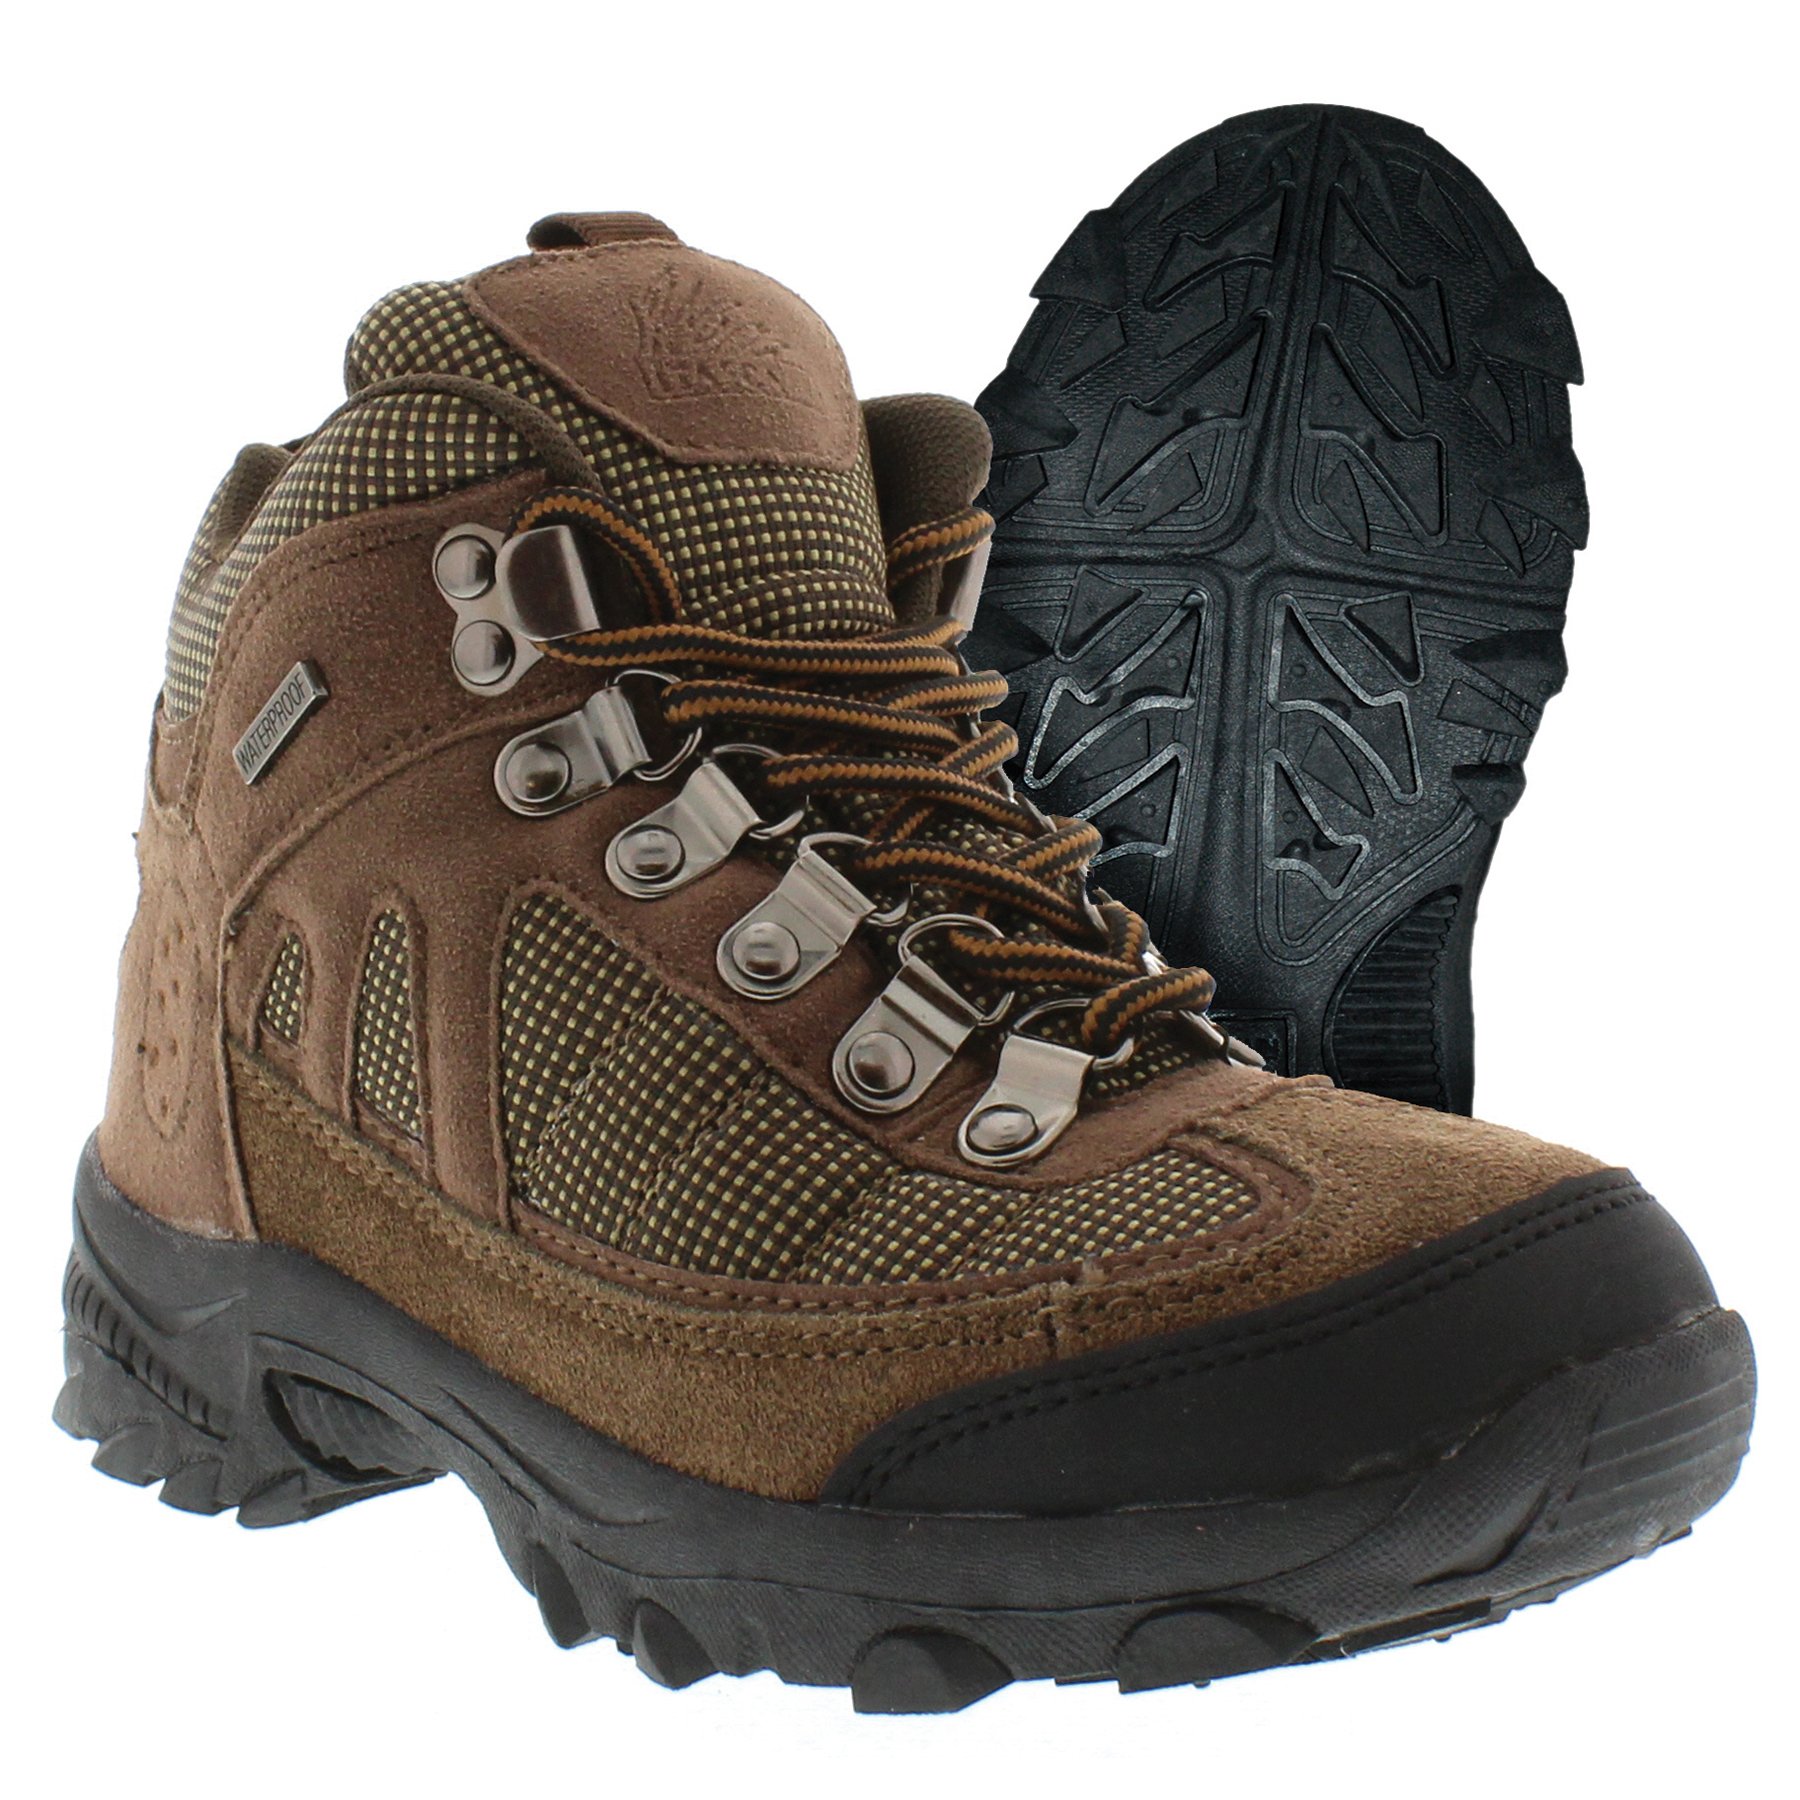 Lincoln Outfitters Kid's Sentinel Waterproof Hiker Boots - 4506815